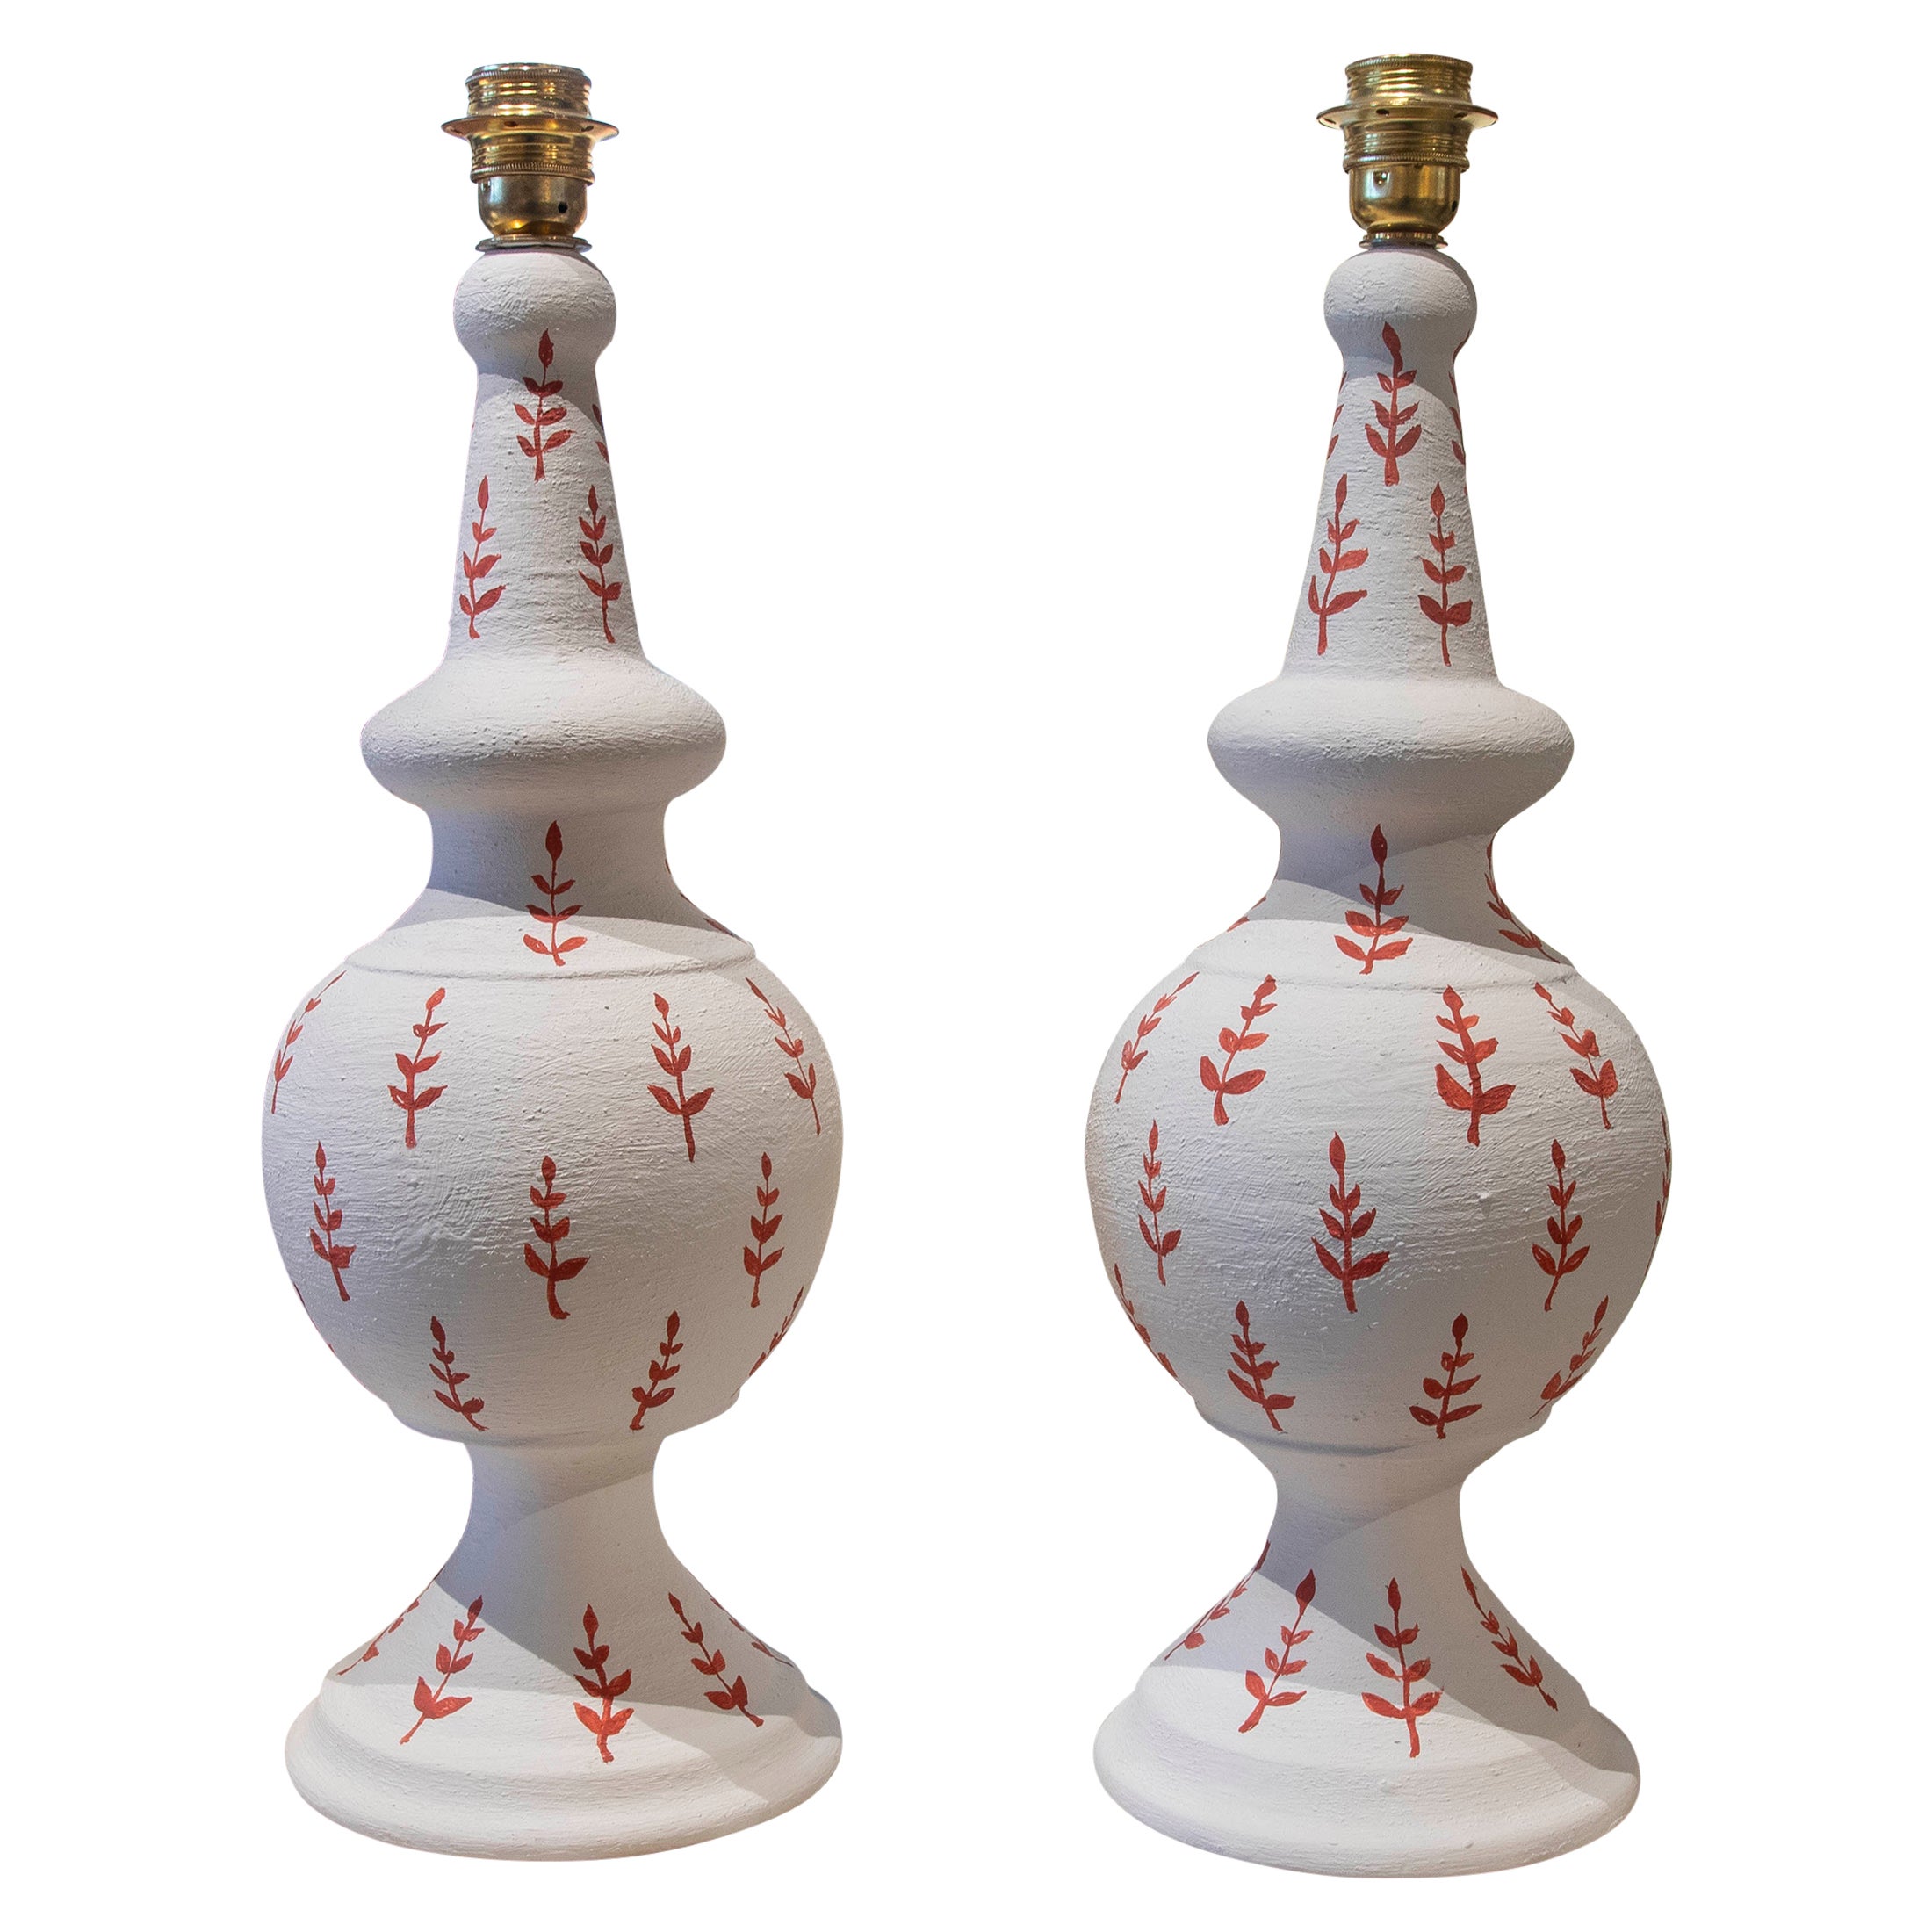 Pair of Hand-Painted Ceramic Lamps with Red Flower Decoration